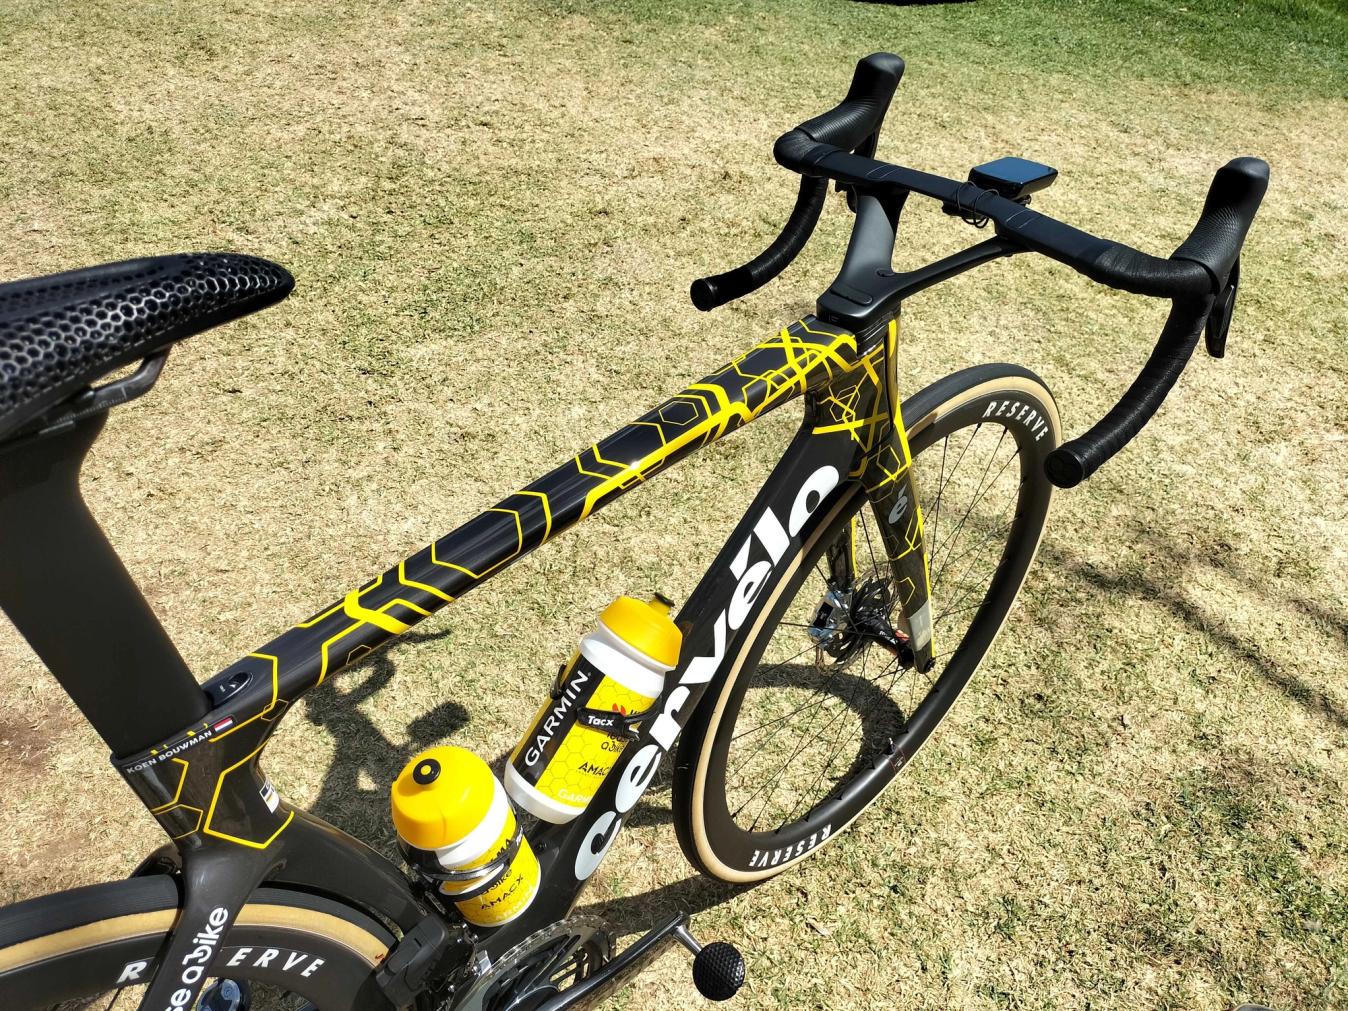 The bike features a new yellow pattern along the top tube